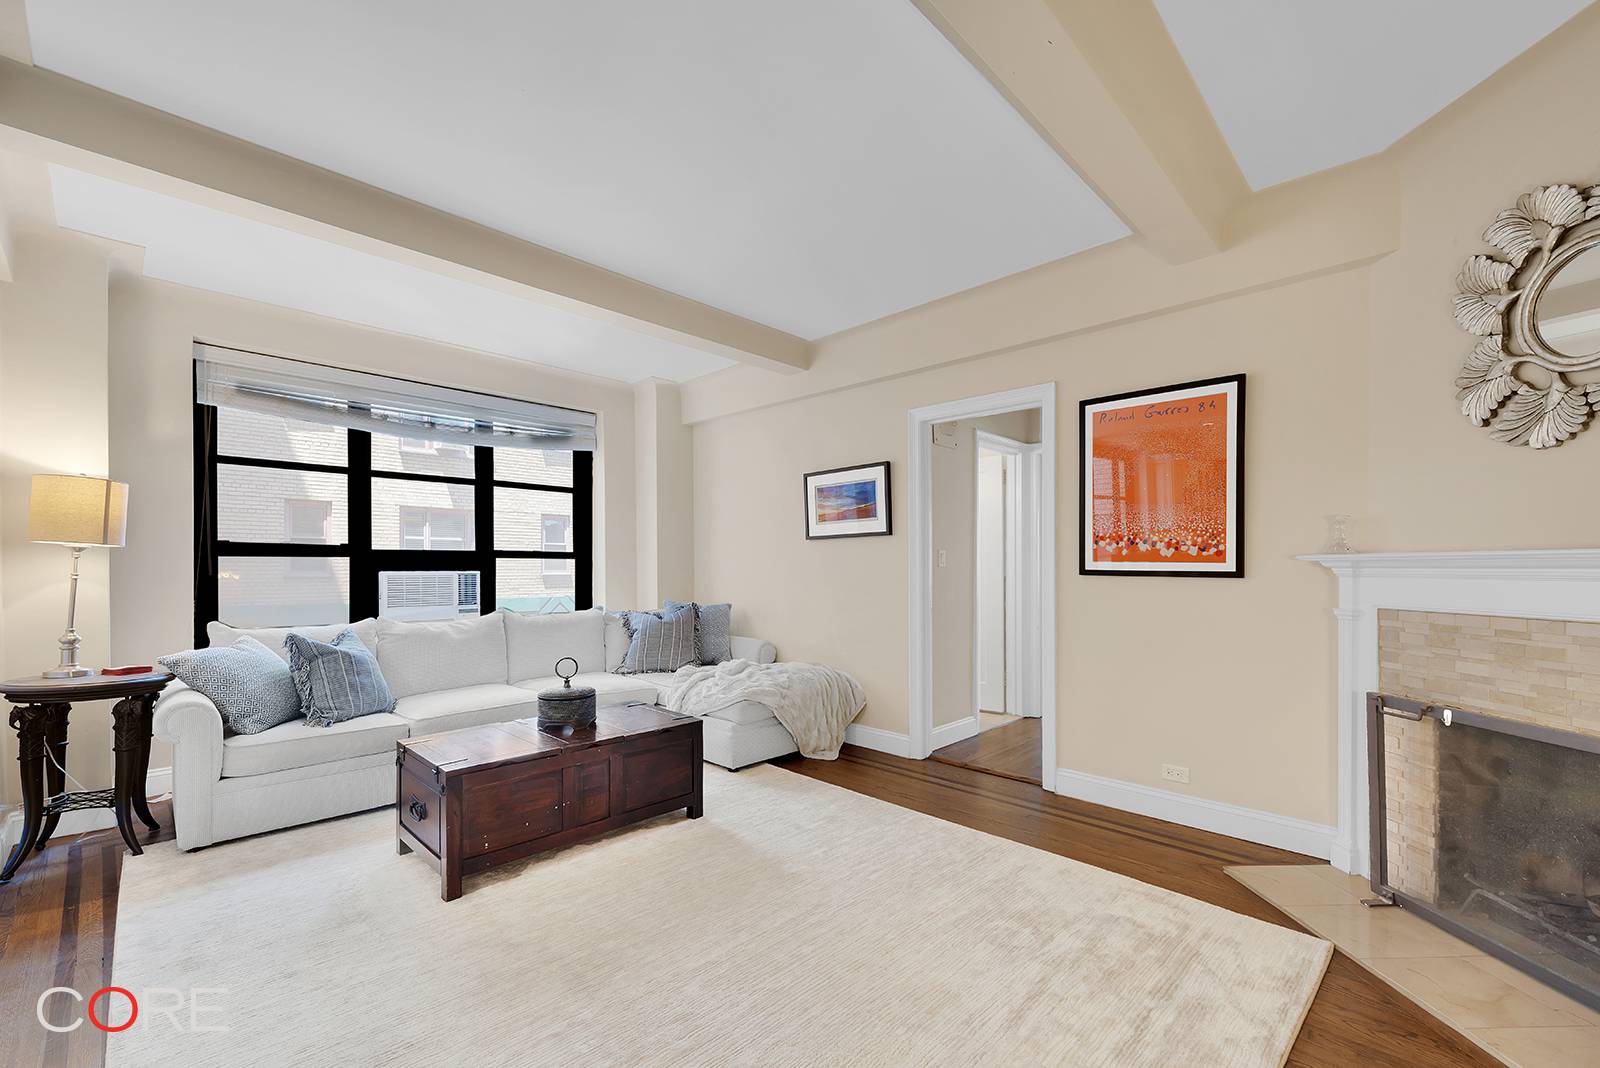 BACK ON THE MARKET ! Beautifully renovated, sunny and spacious one bedroom at Gramercy House one of the most coveted doorman buildings in Gramercy.